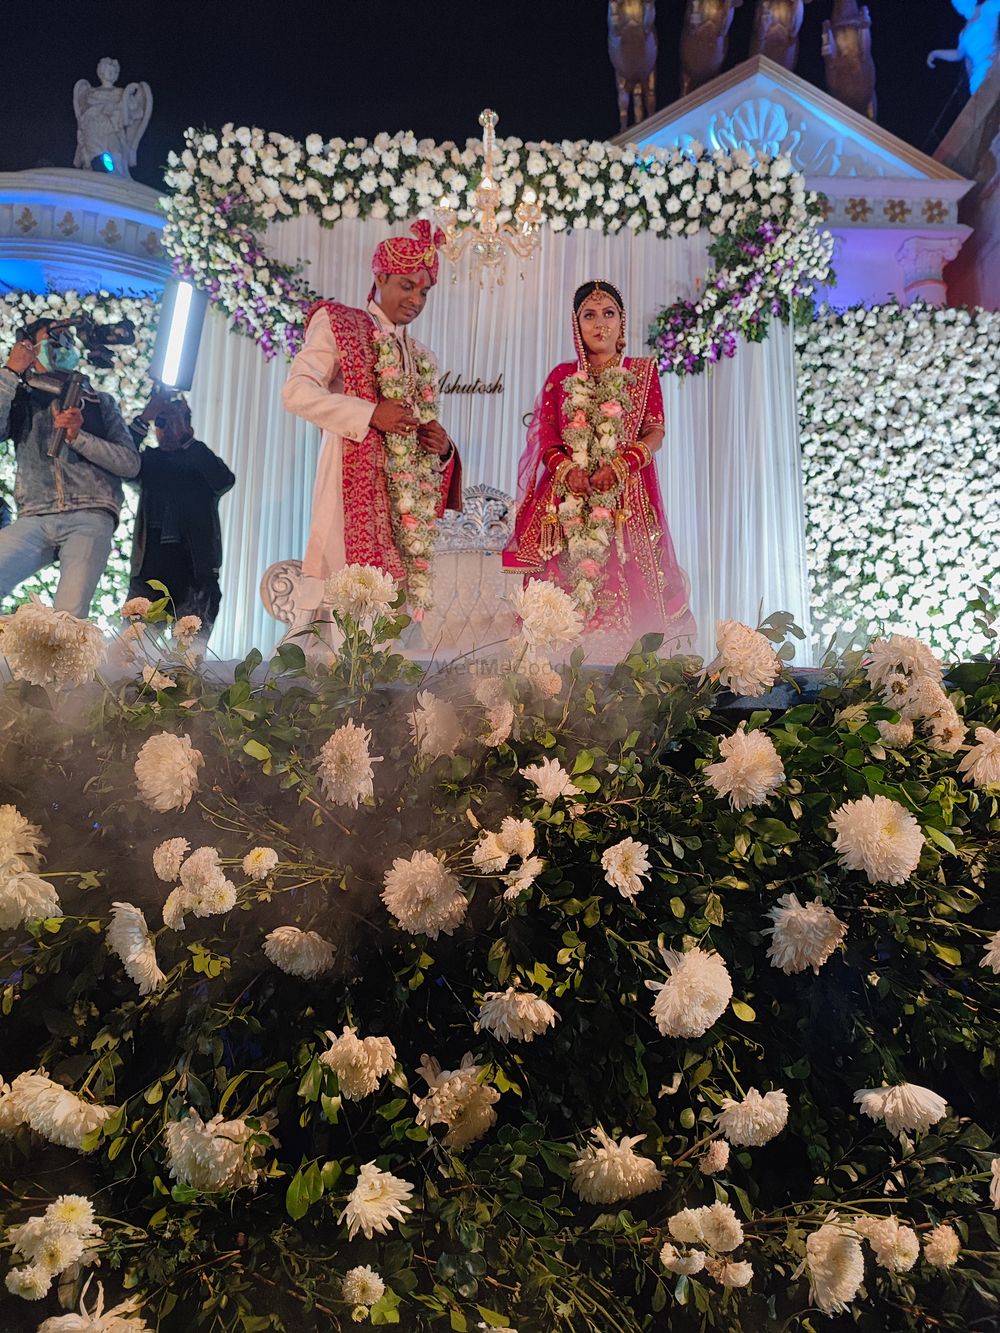 Photo From Alka & Ashutosh - By The Decor Inc.